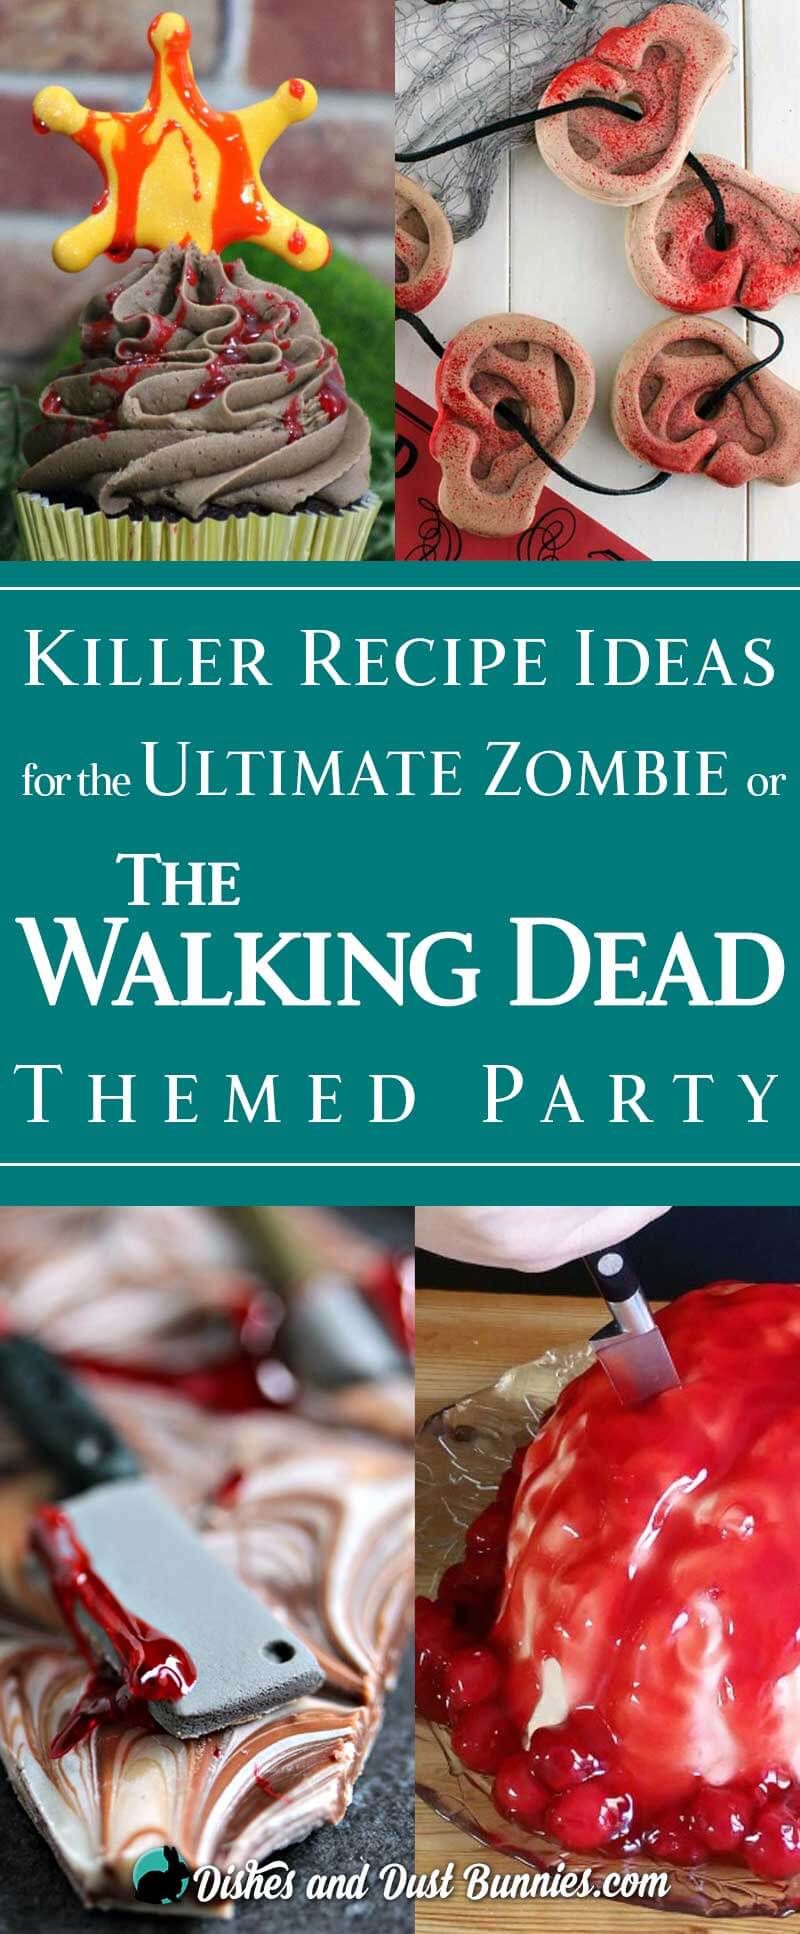 Killer Recipe Ideas for the Ultimate Zombie or The Walking Dead Themed Party - dishesanddustbunnies.com